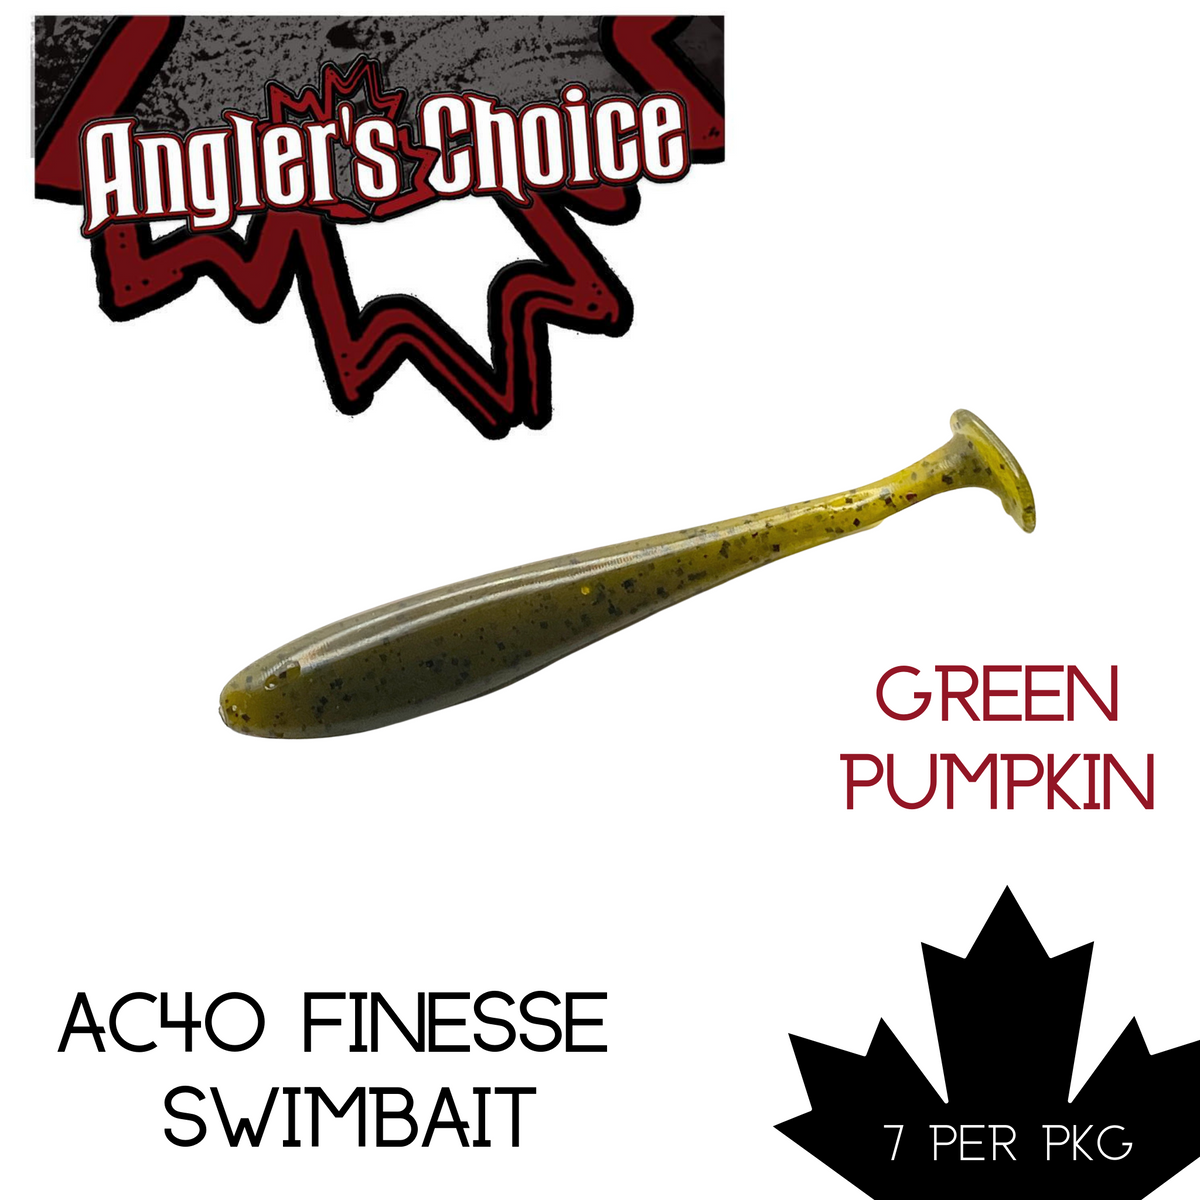 ANGLER'S CHOICE AC 40 FINESSE SWIMBAIT – Tackle Terminal